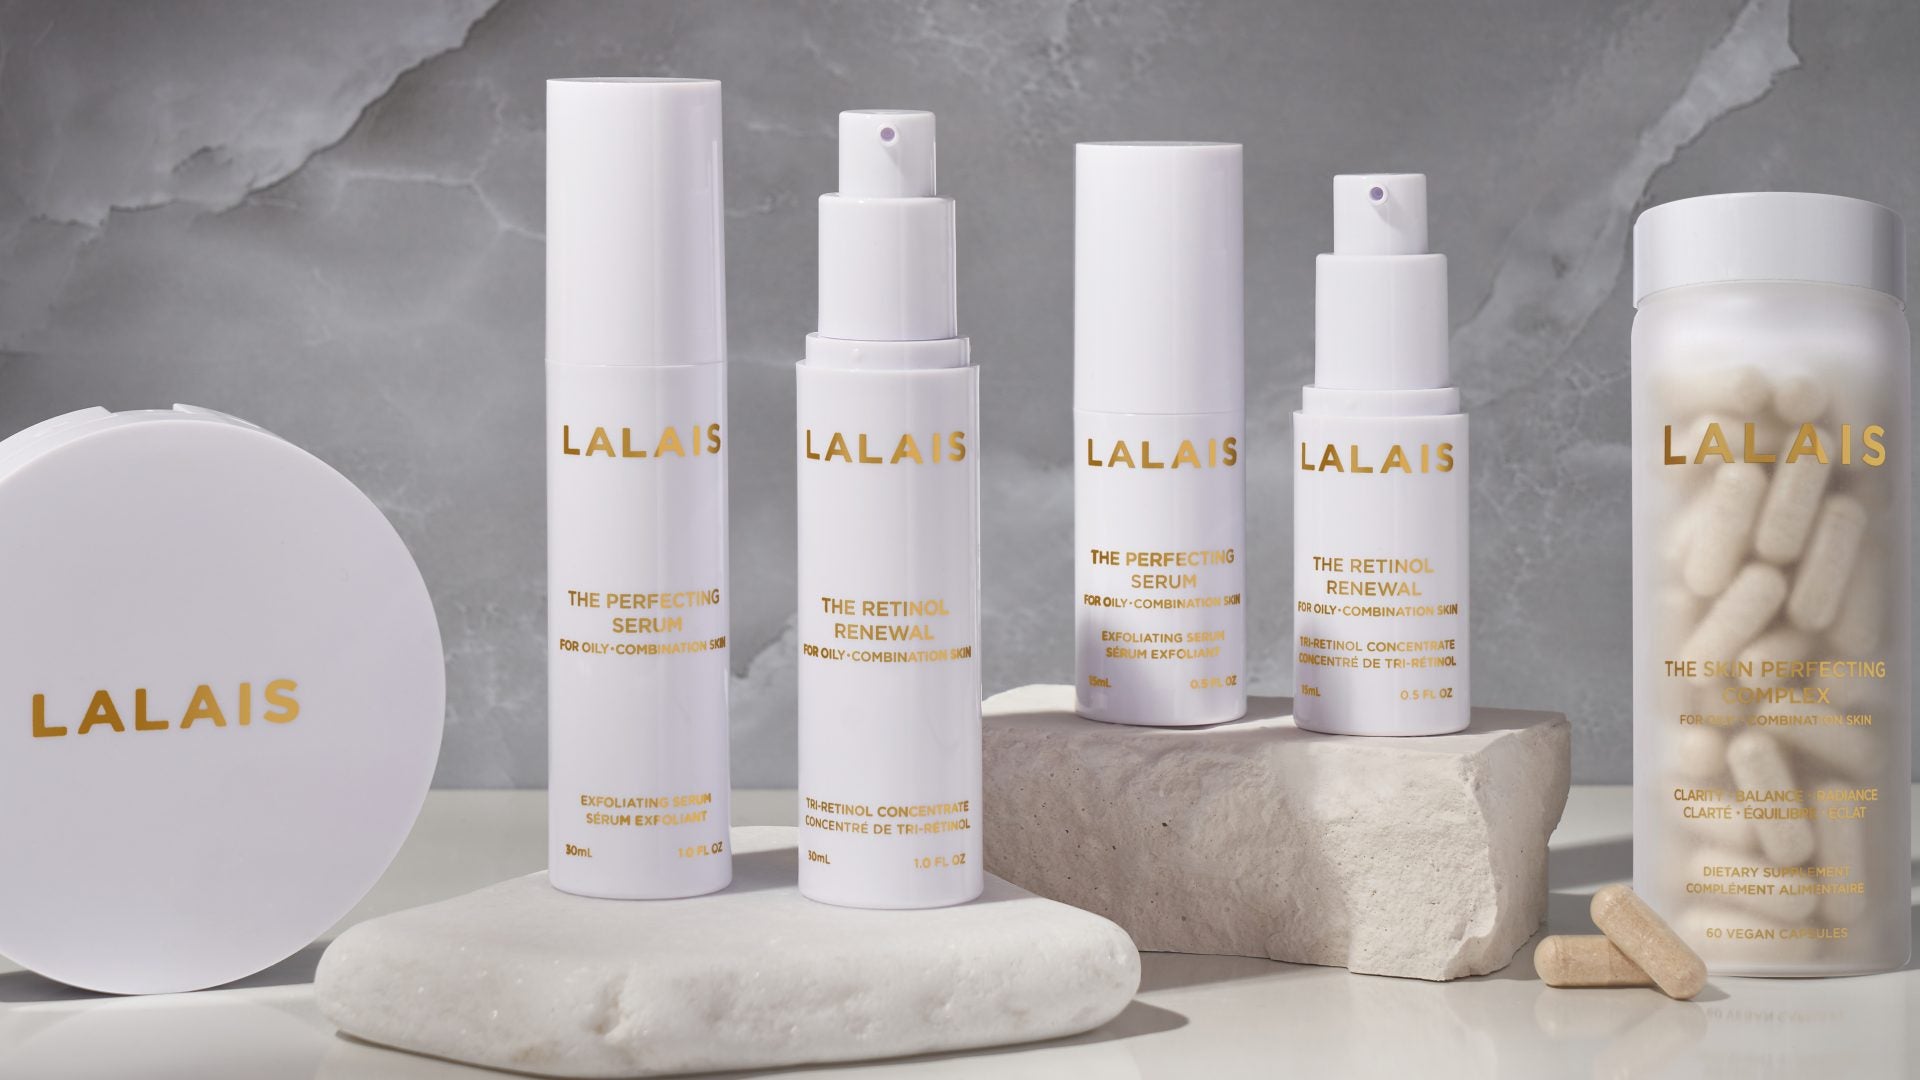 Meet LALAIS: The First Luxury Skincare Brand For Oily Skin Types